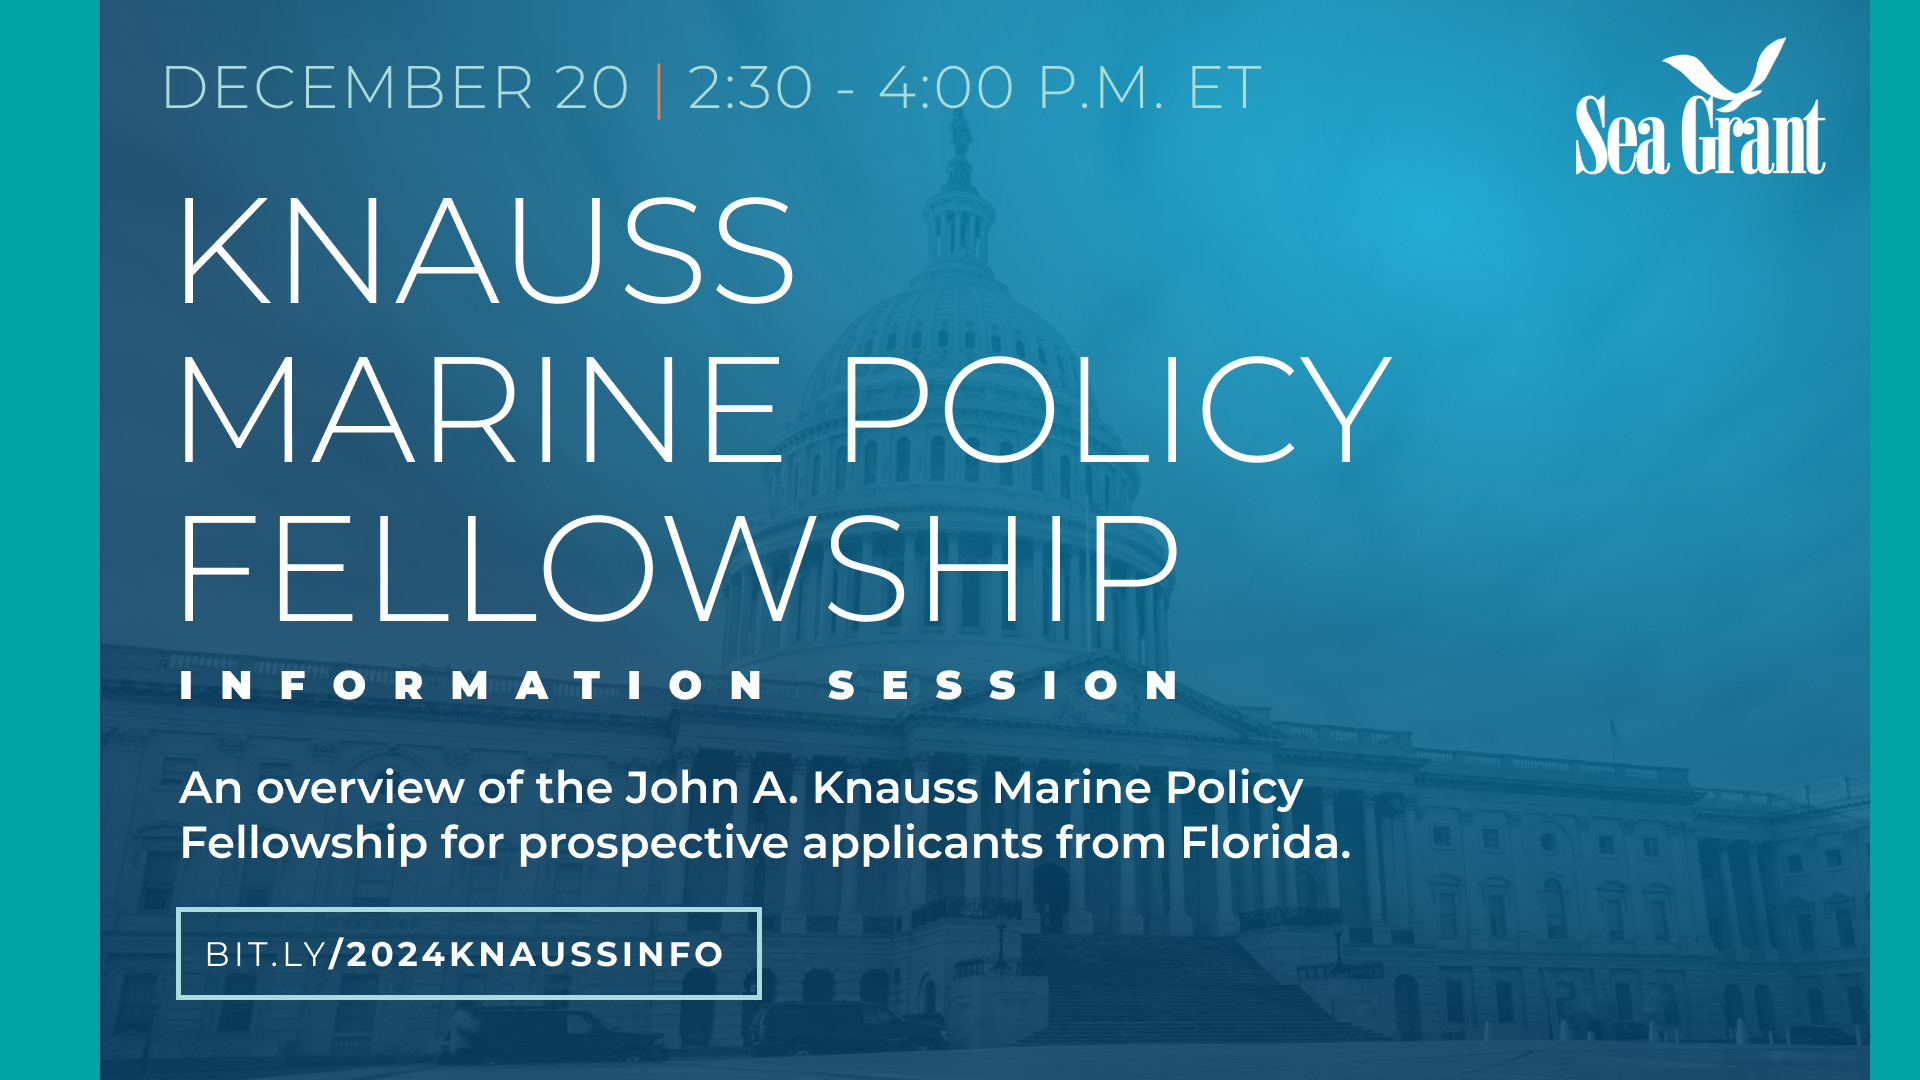 event graphic detailing date and time of the 2024 Knauss Marine Policy Fellowship information session for prospective applicants from Florida